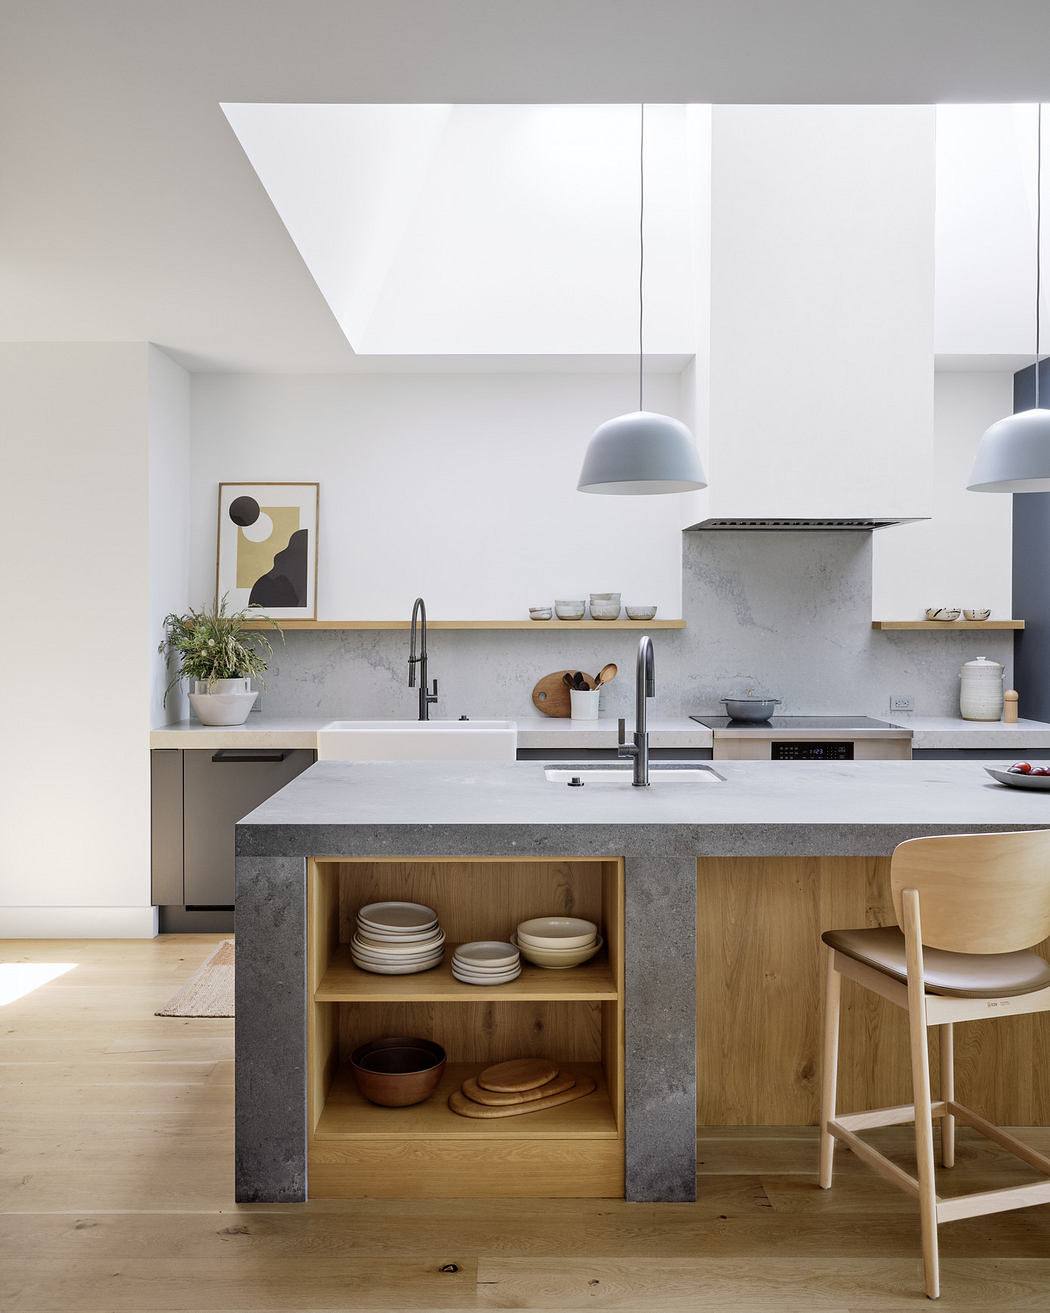 Modern kitchen with clean lines, pendant lights, and open shelving.